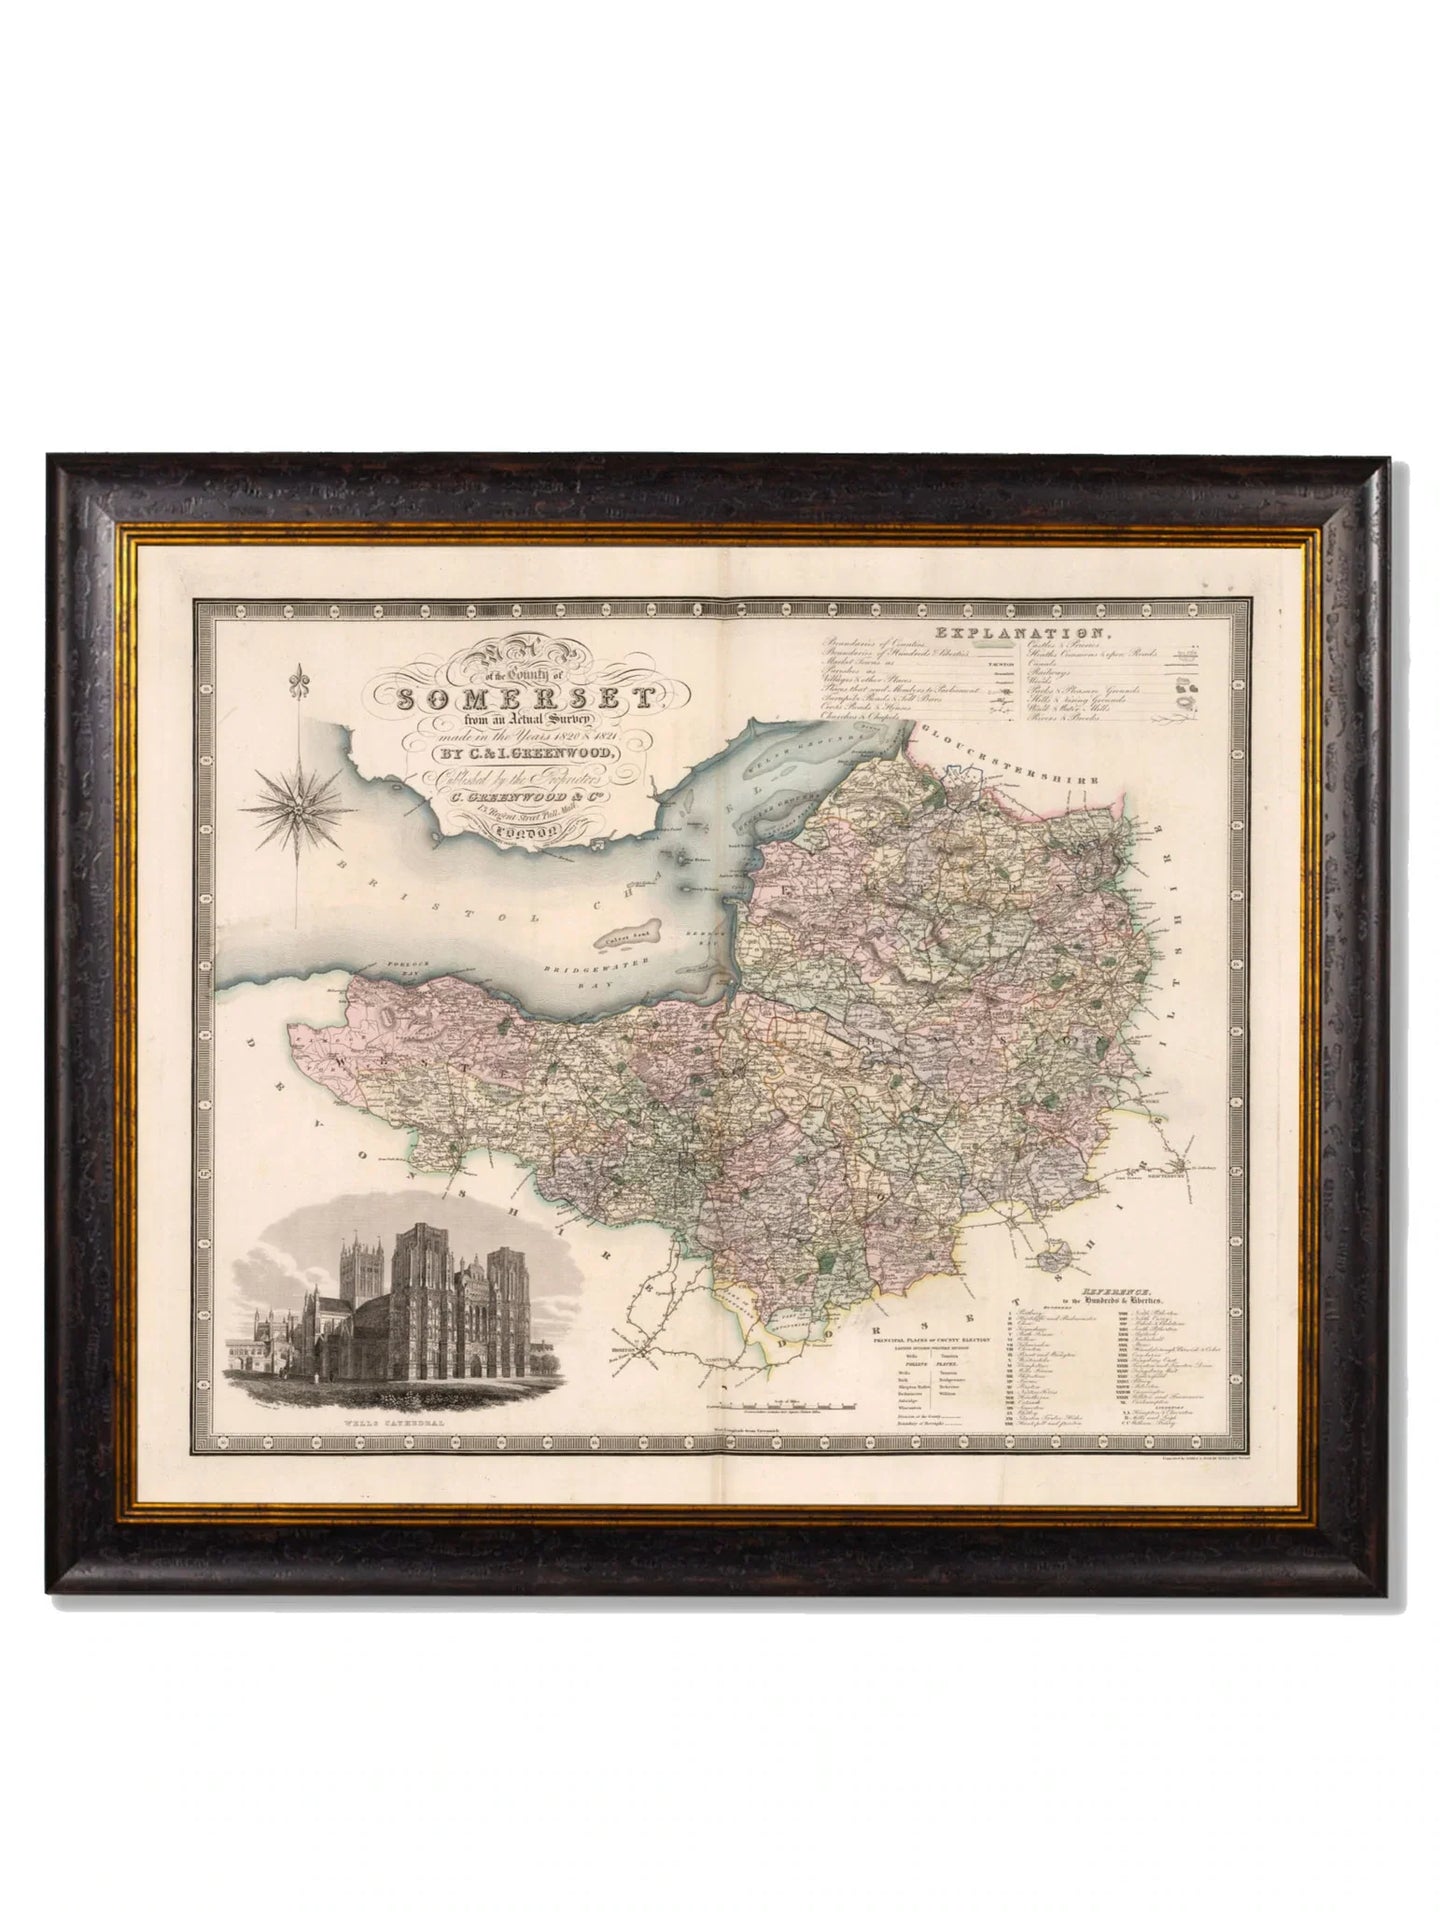 C.1830 County Maps Of England Frames for sale - Woodcock and Cavendish